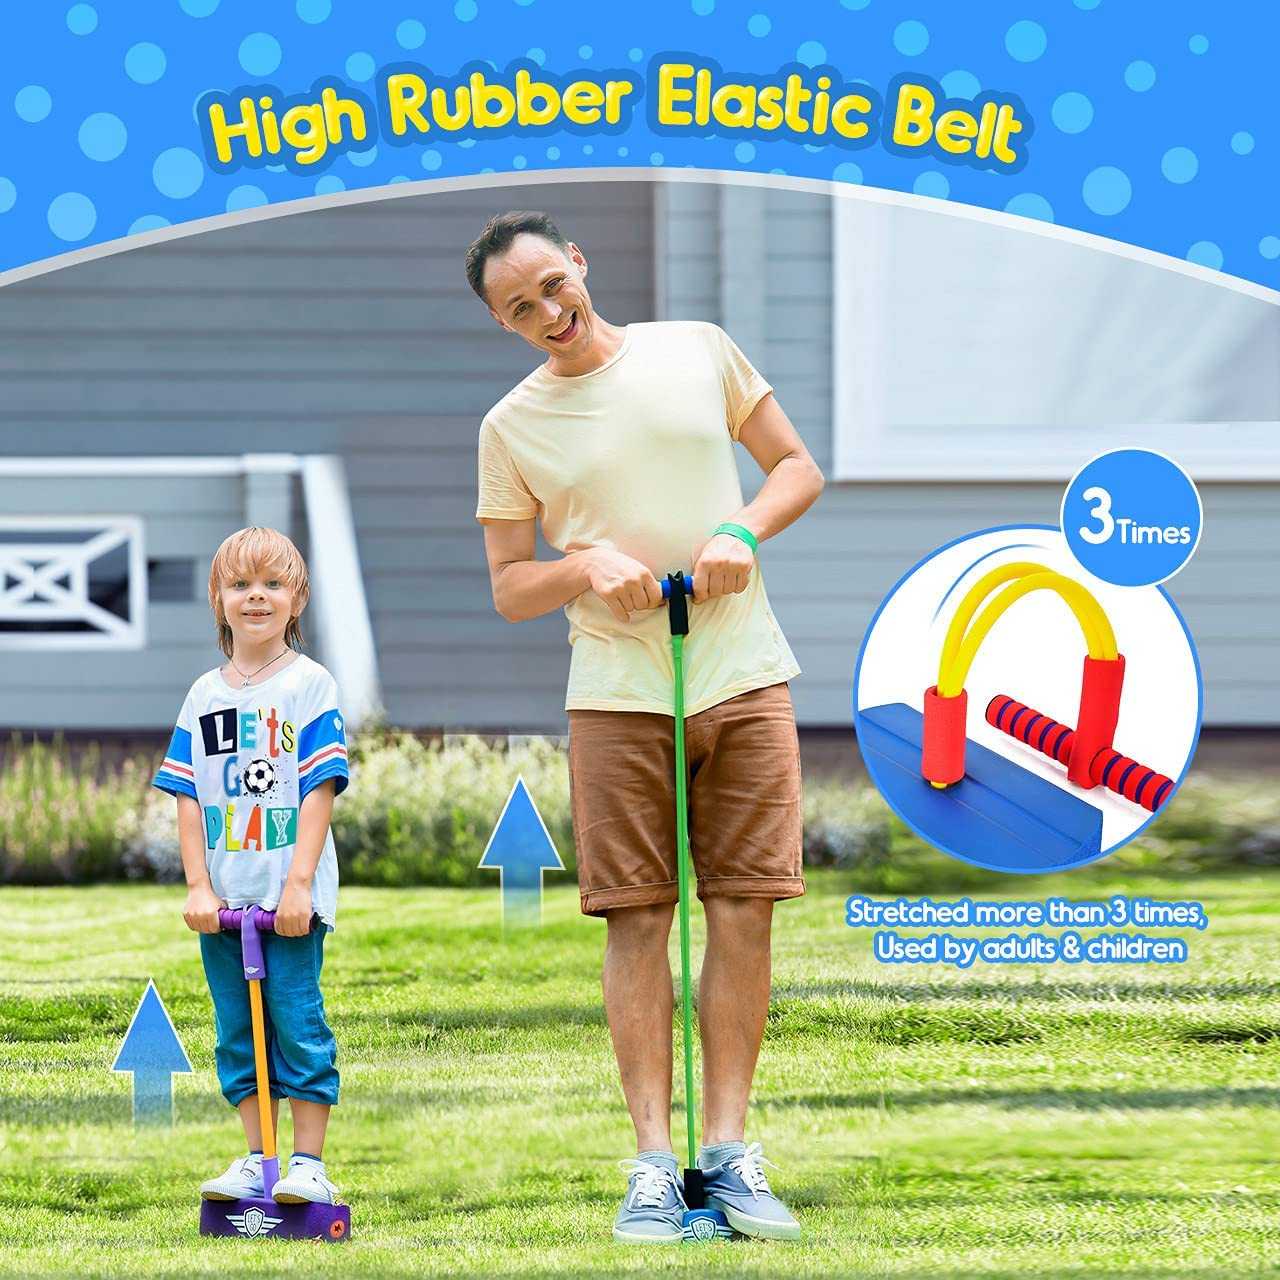 Abnah (TM) Pogo Jumper for Kids, Fun and Safe Pogo Stick, Durable Foam and Bungee Jumper for Kids